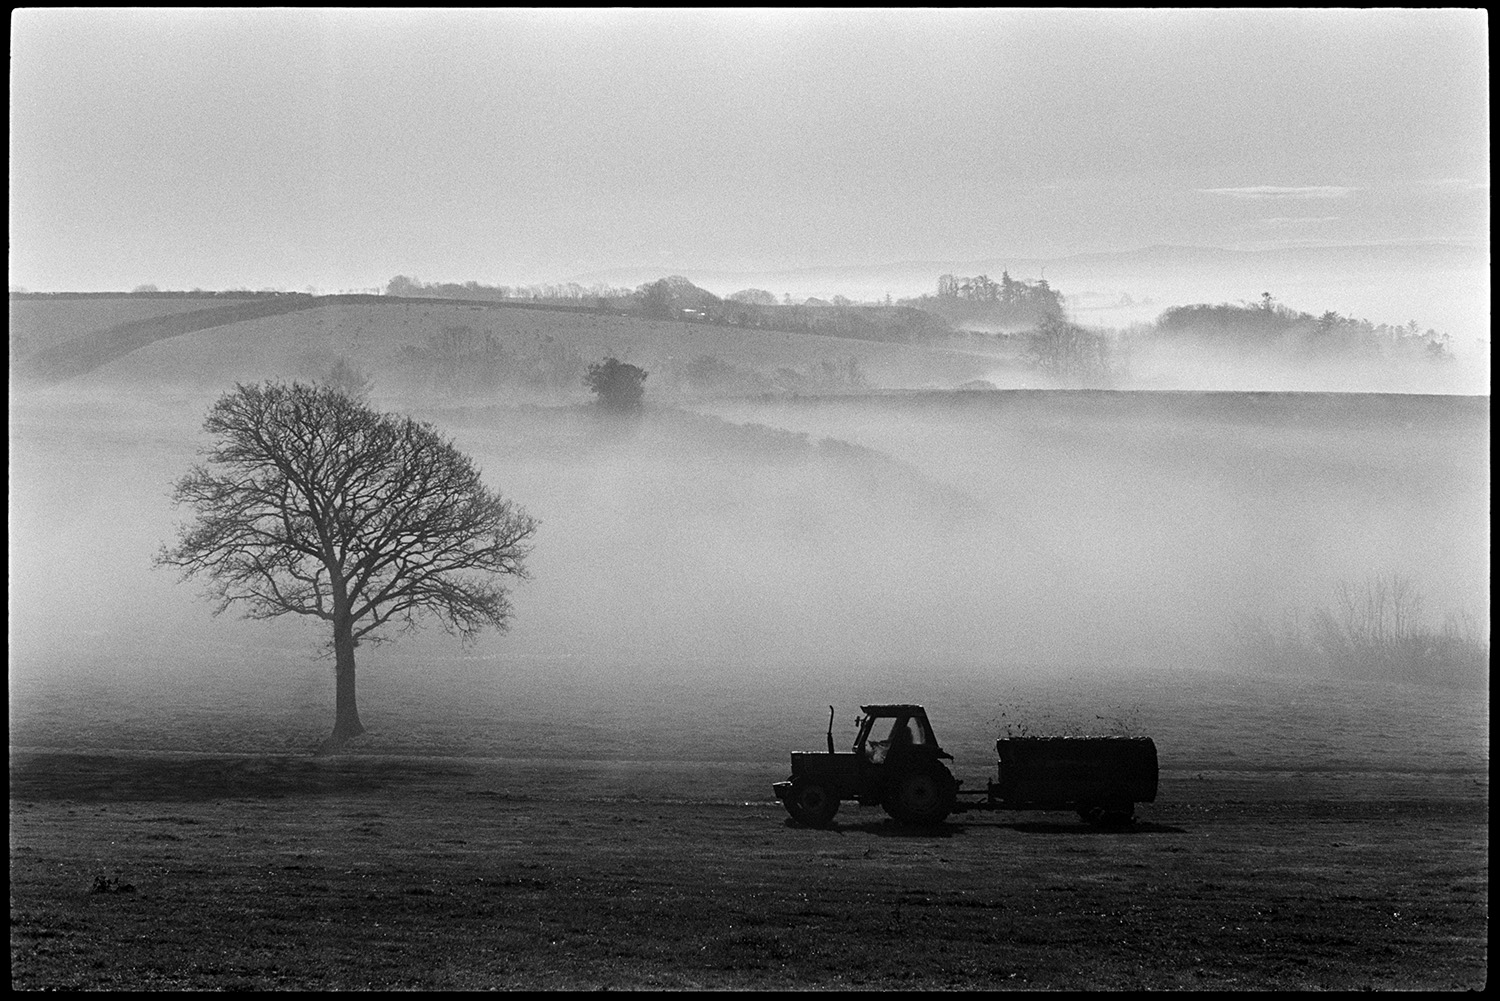 Landscape morning mist, cows and misty woods. 
[A farmer muckspreading with a tractor and muck spreader in a field at Harepath, Beaford in the morning. A misty landscape with trees and fields can be seen in the background.]